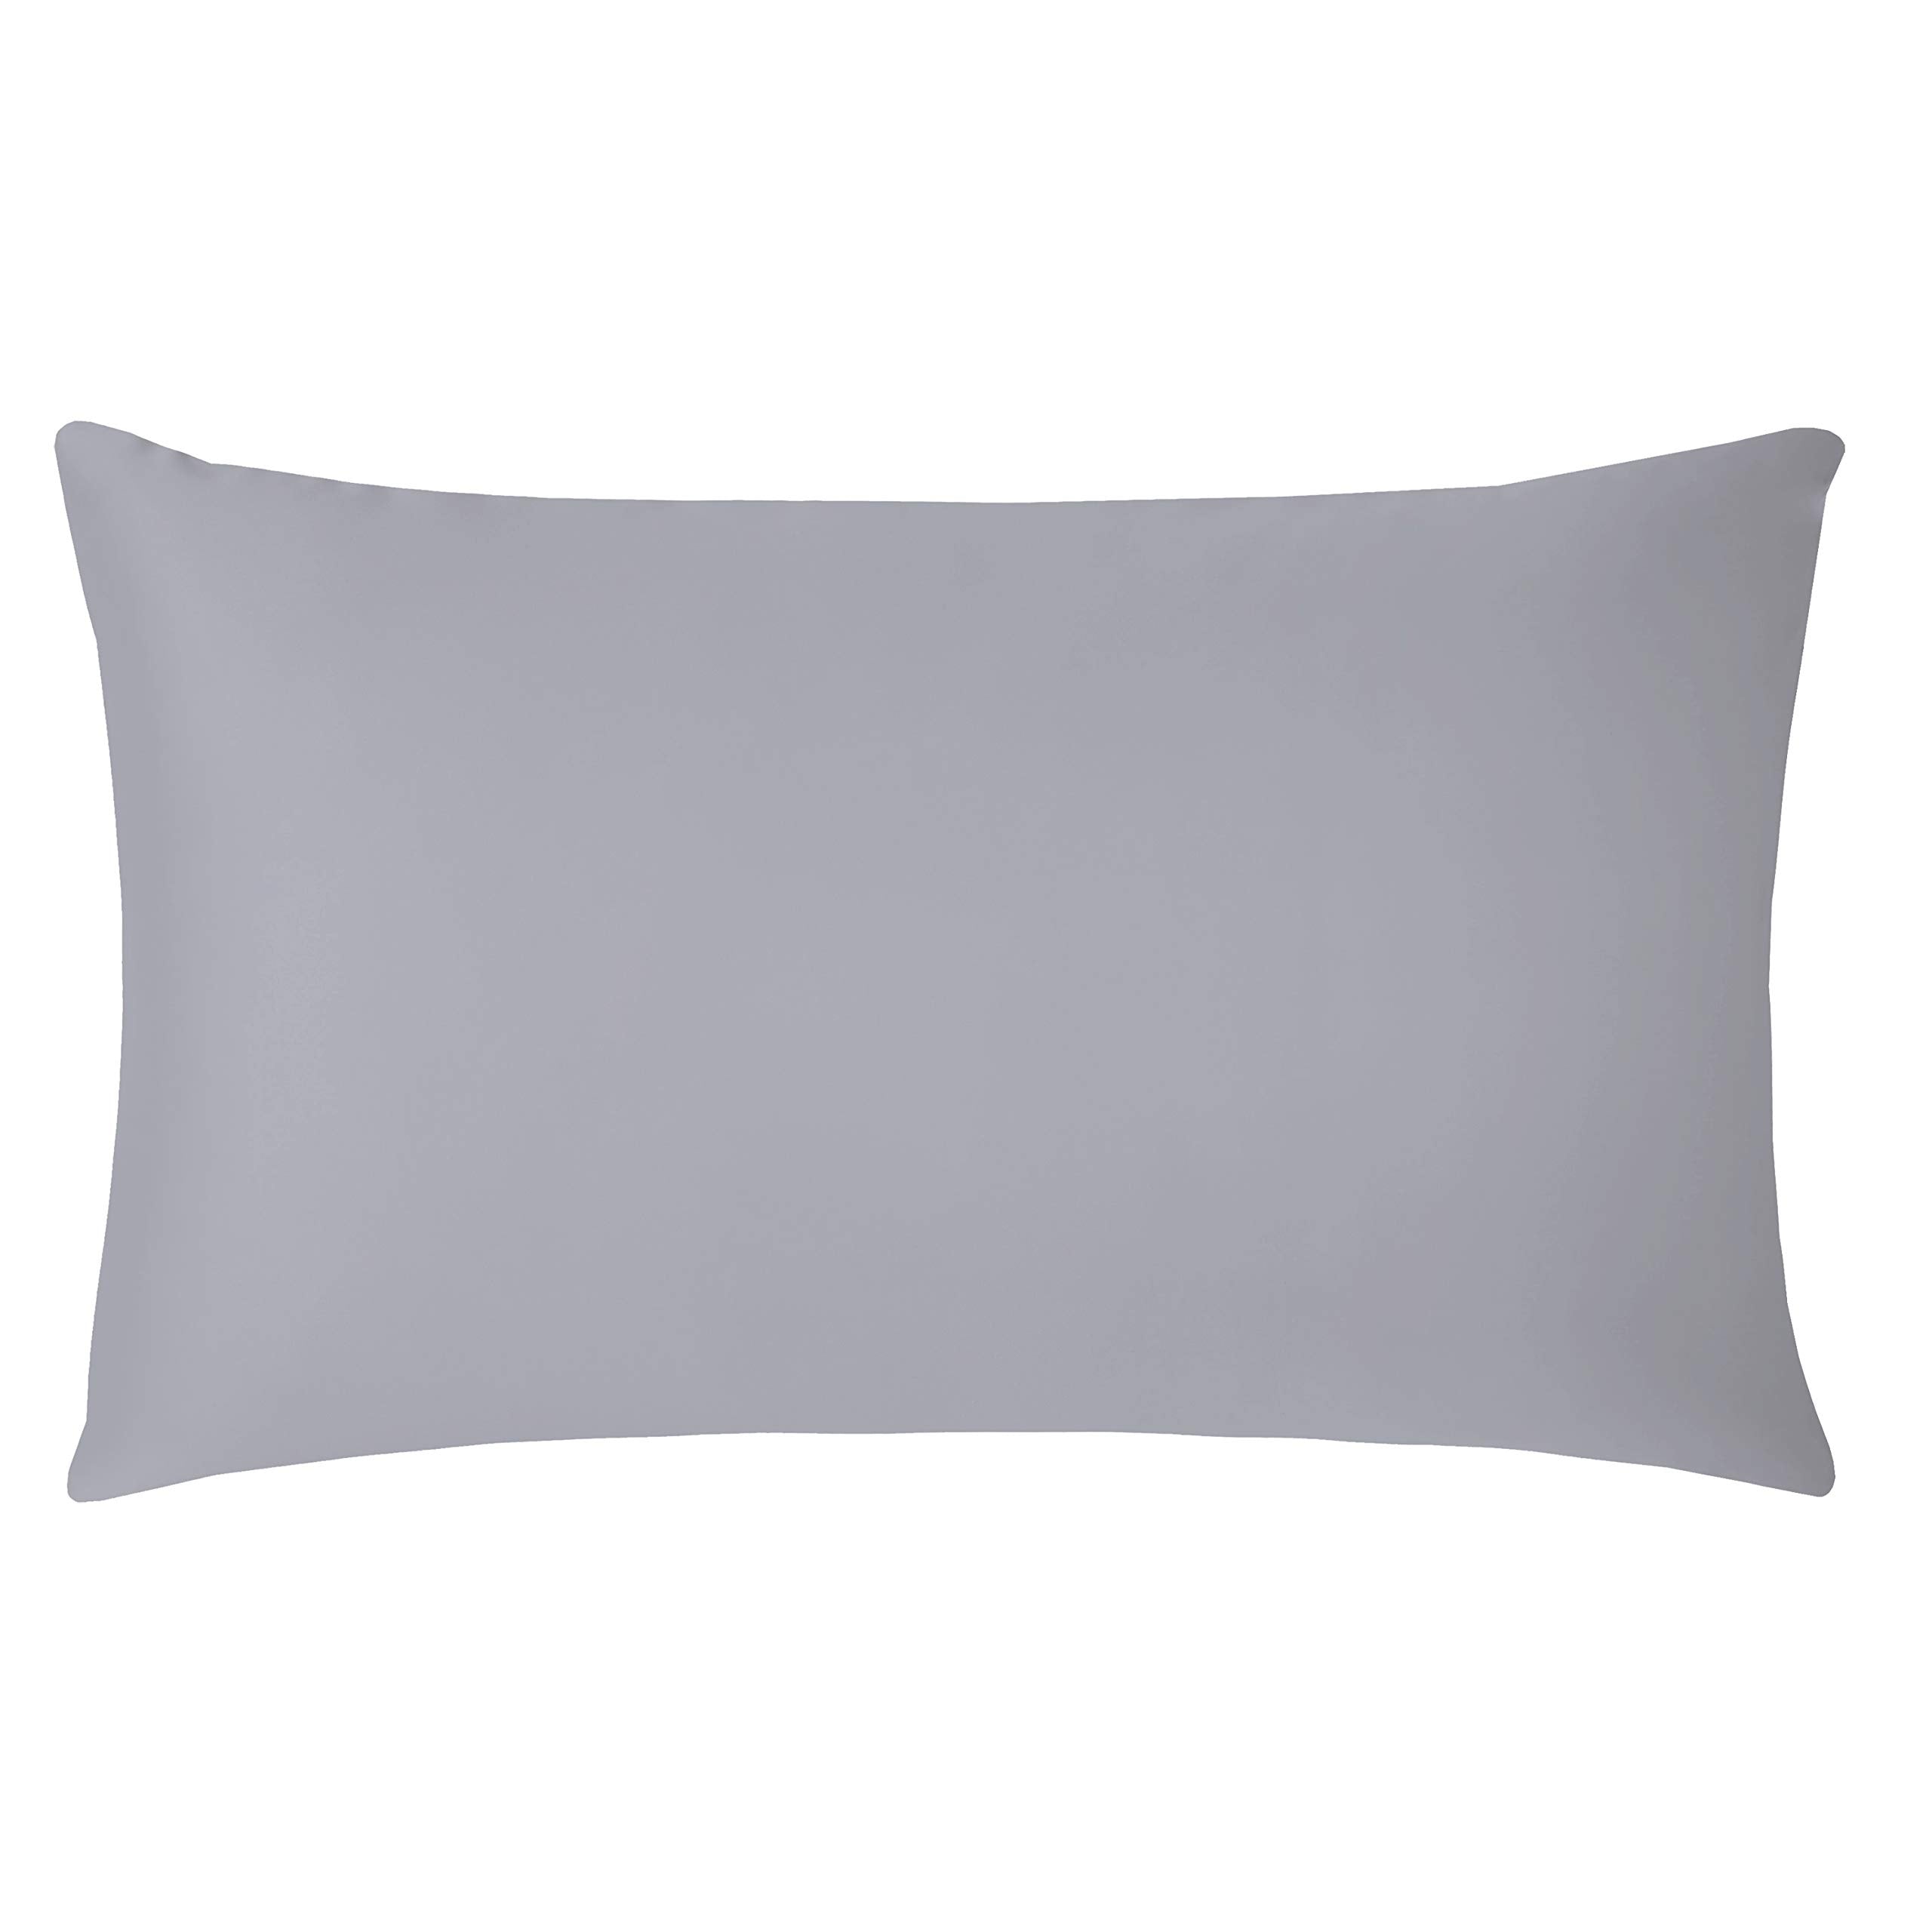 Flexible PolyCotton Pillowcases, 2 Pack Soft Cozy and Breathable Envelope Closure Standard PillowCase 50x75 cm Pillow Covers (GREY)